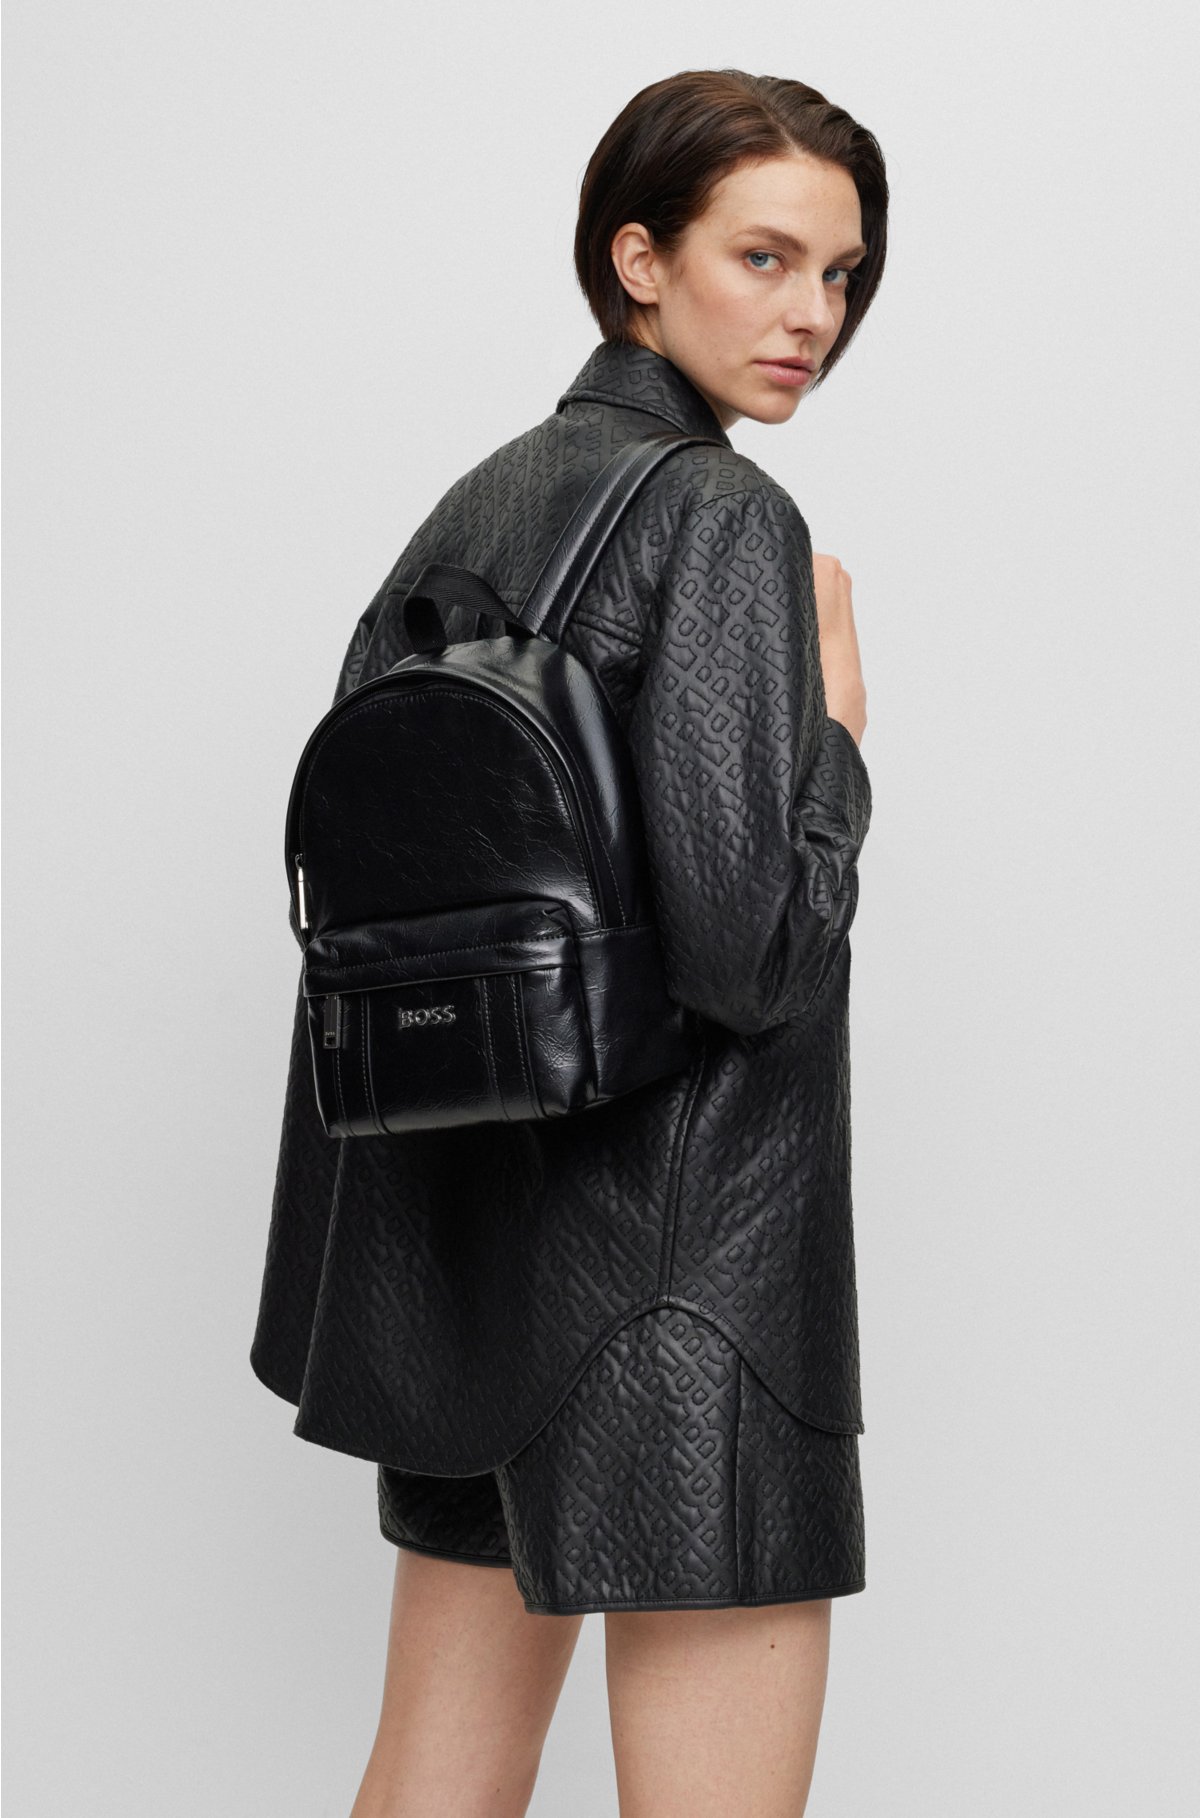 BOSS - Faux-leather backpack with metallic logo lettering